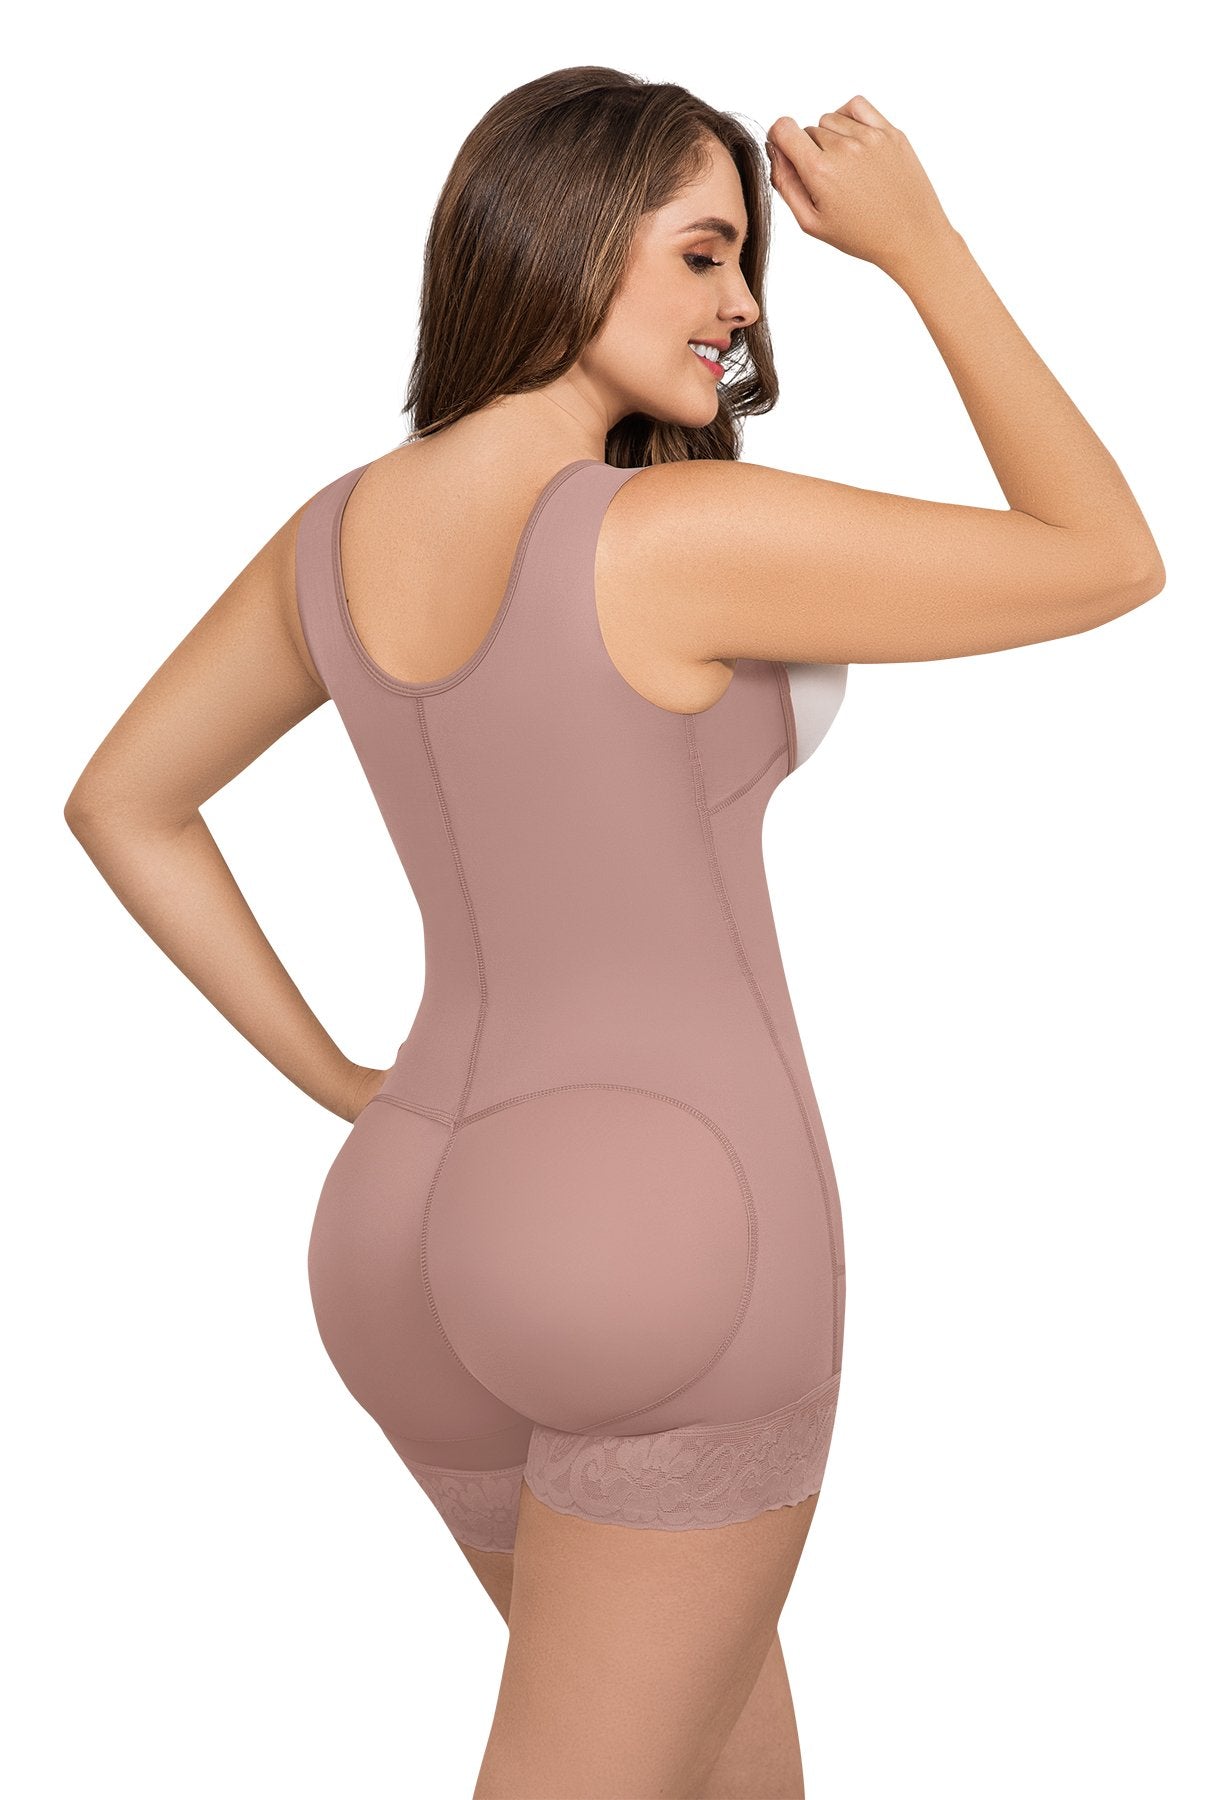 RECOVERY GIRDLE - SKINTEX - Silhouettes and Curves